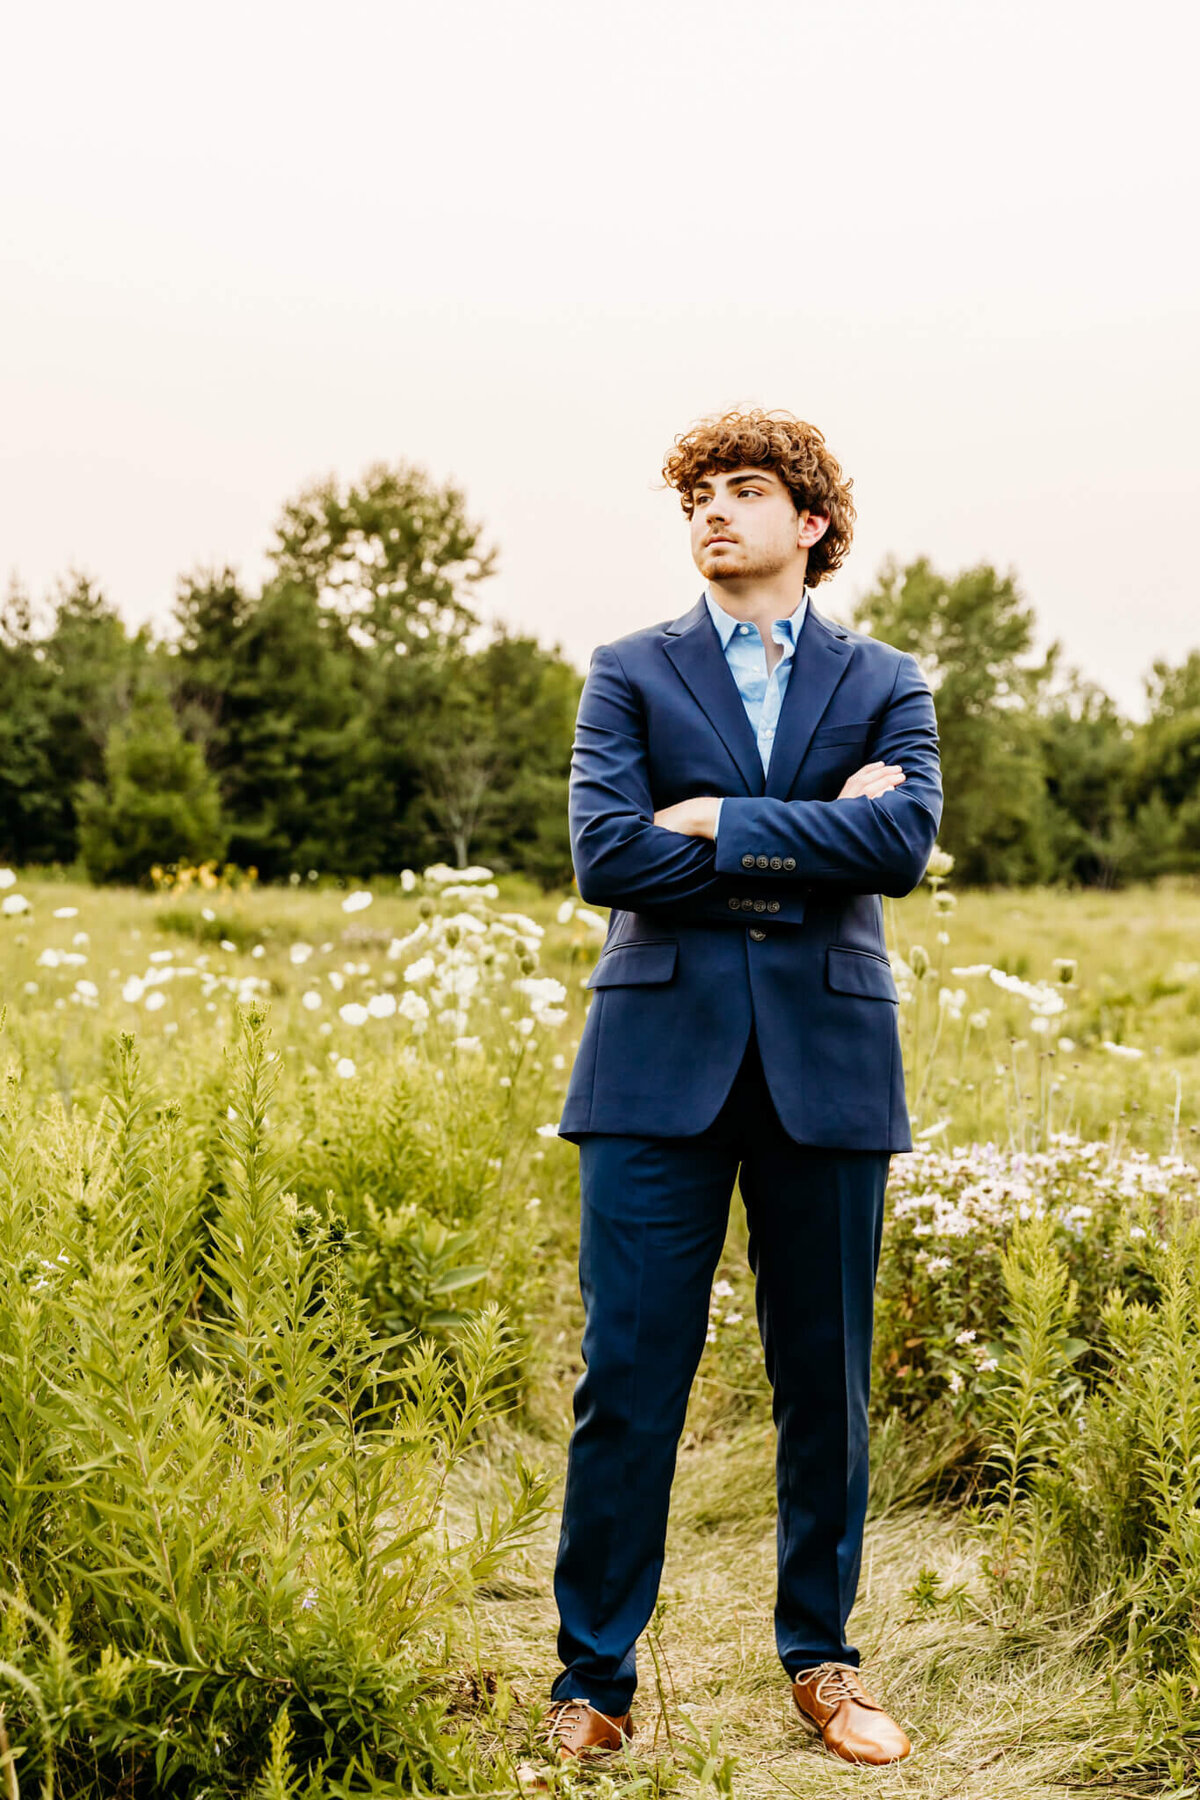 young man surrounded by wildflowers in a blue suit crossing his arms and looking out